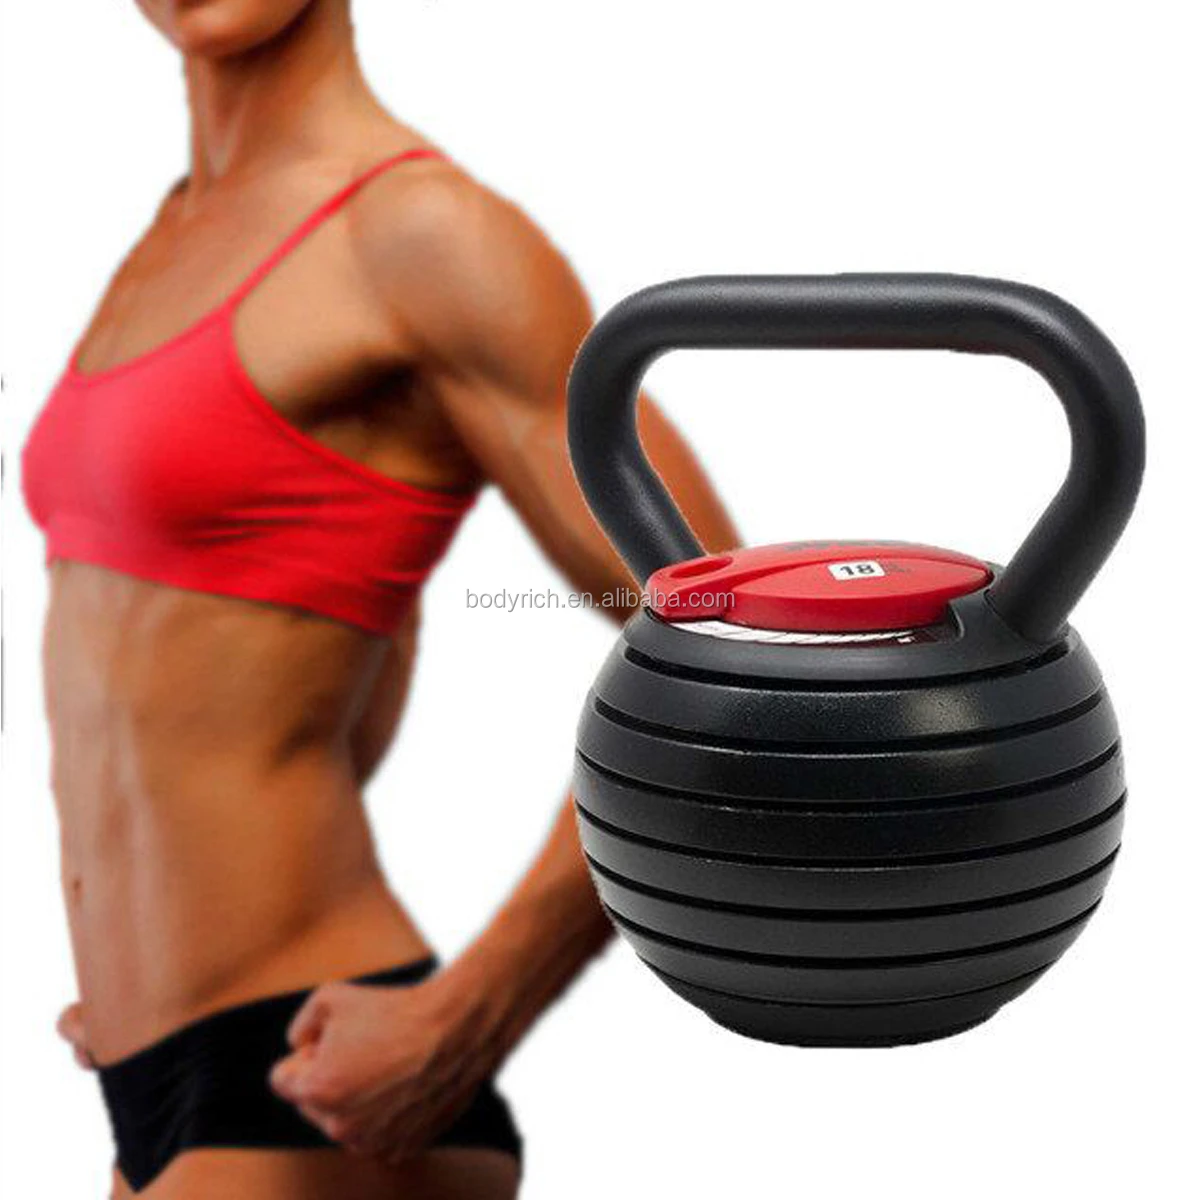 10 to 40 LB Adjustable Kettlebell Weight Lifting Swing Workout